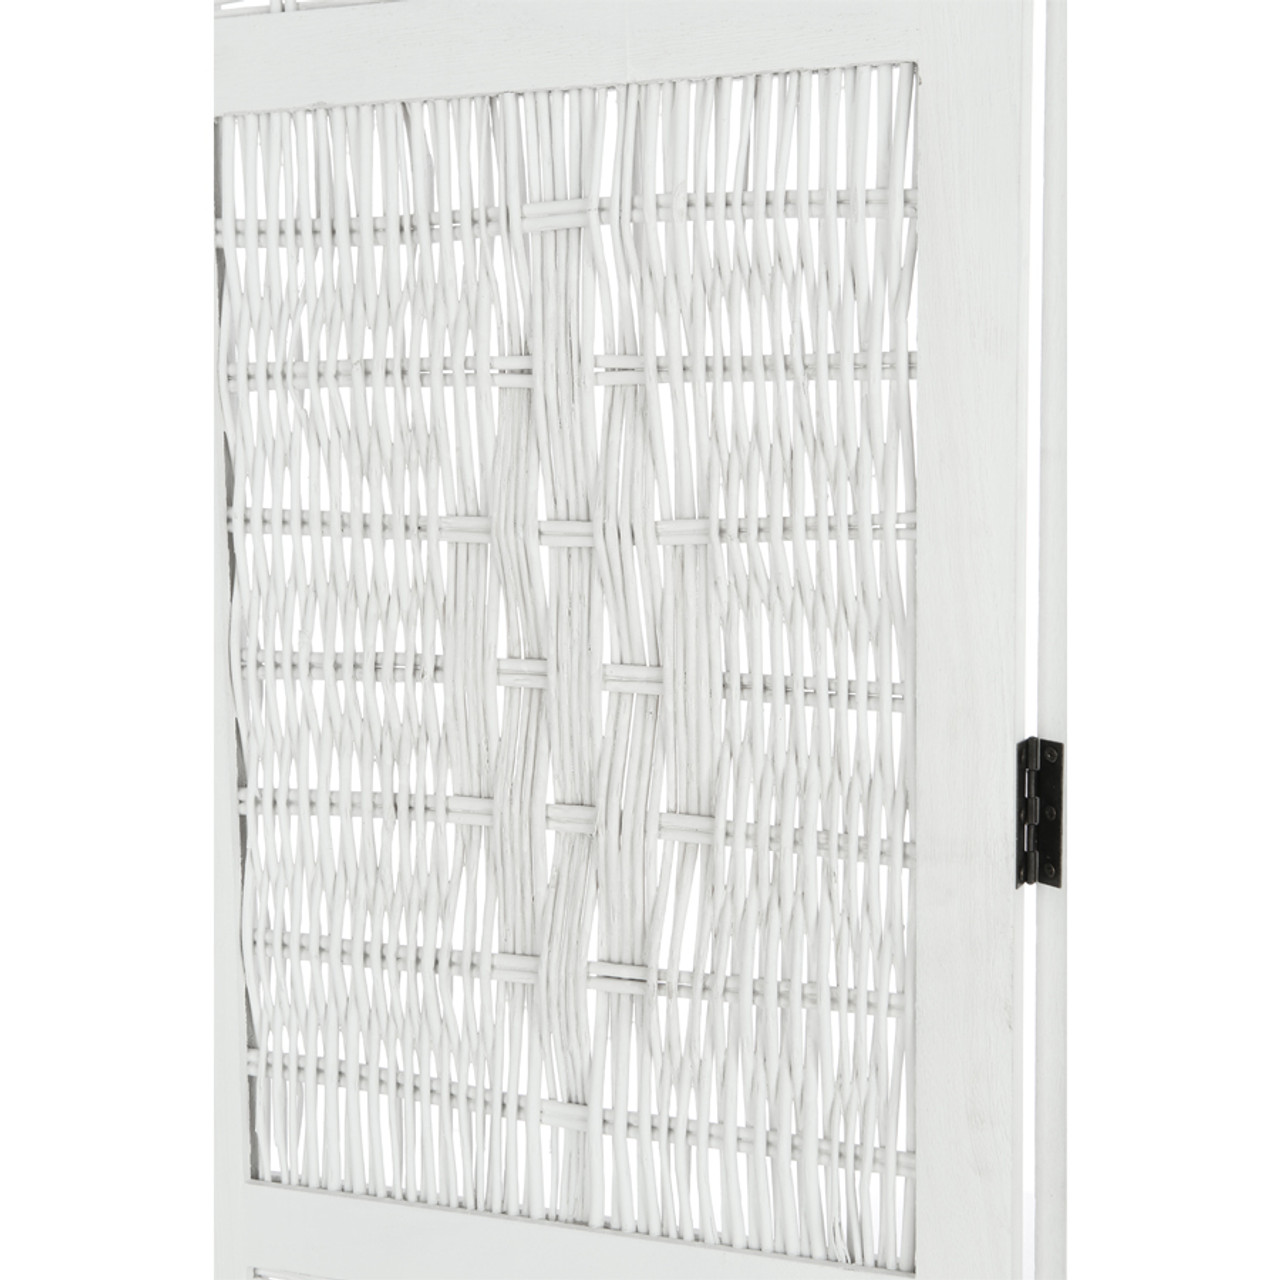 Room Divider 3 Panel Wicker Weave Design with a Diamond Shaped Accent, White or Brown Color